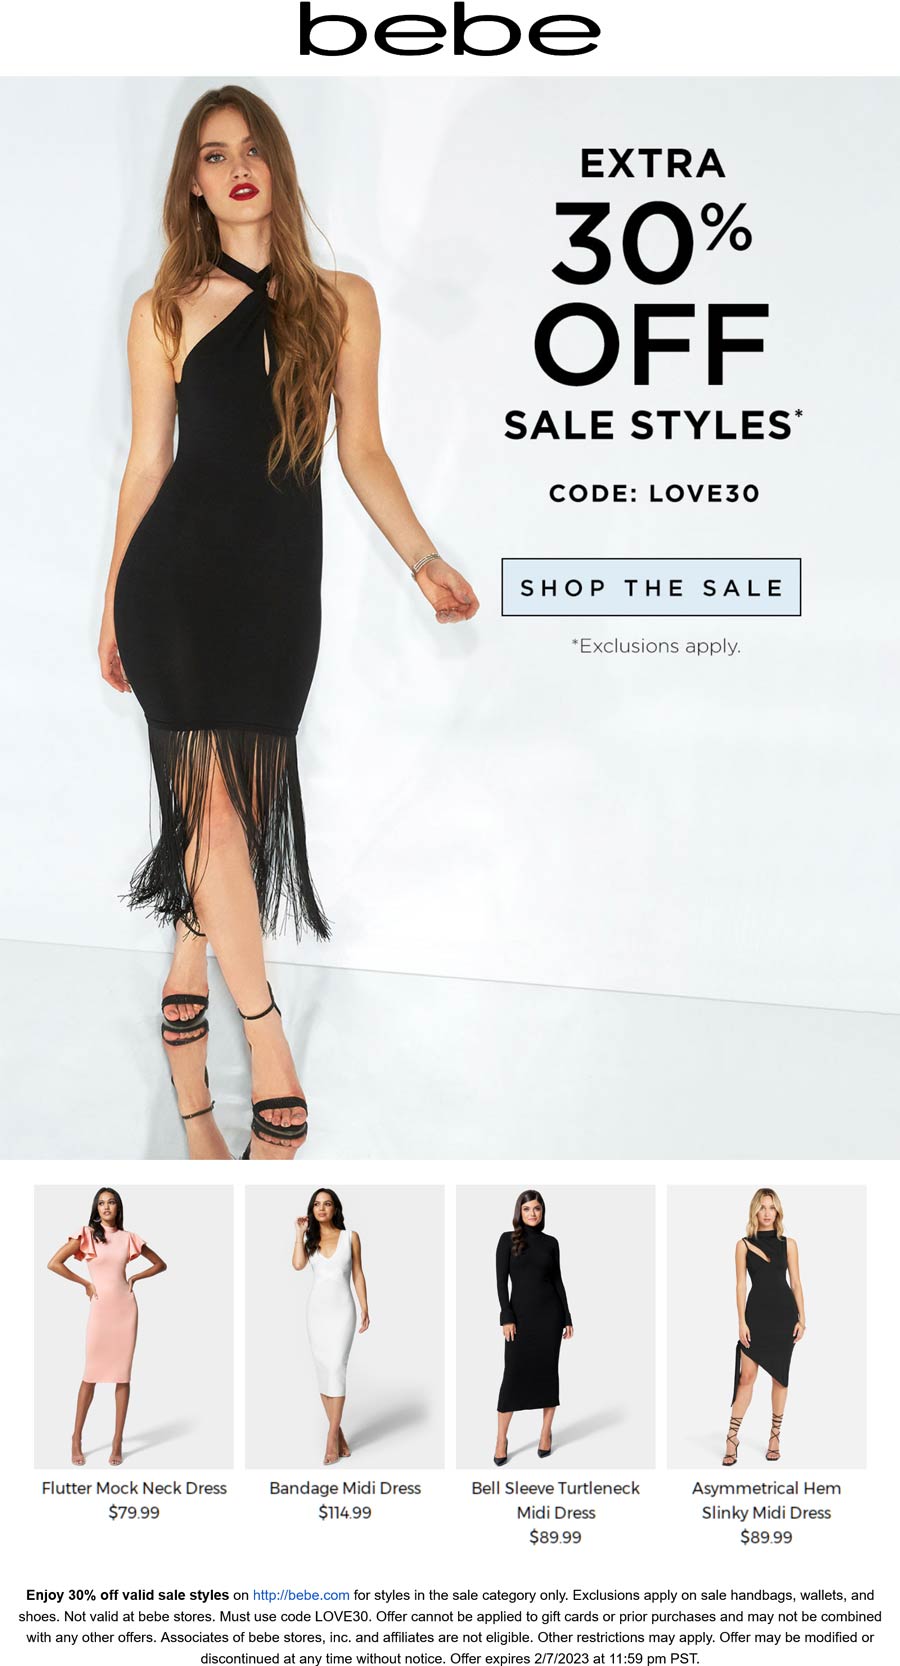 bebe stores Coupon  Extra 30% off sale styles at bebe via promo code LOVE30 #bebe 